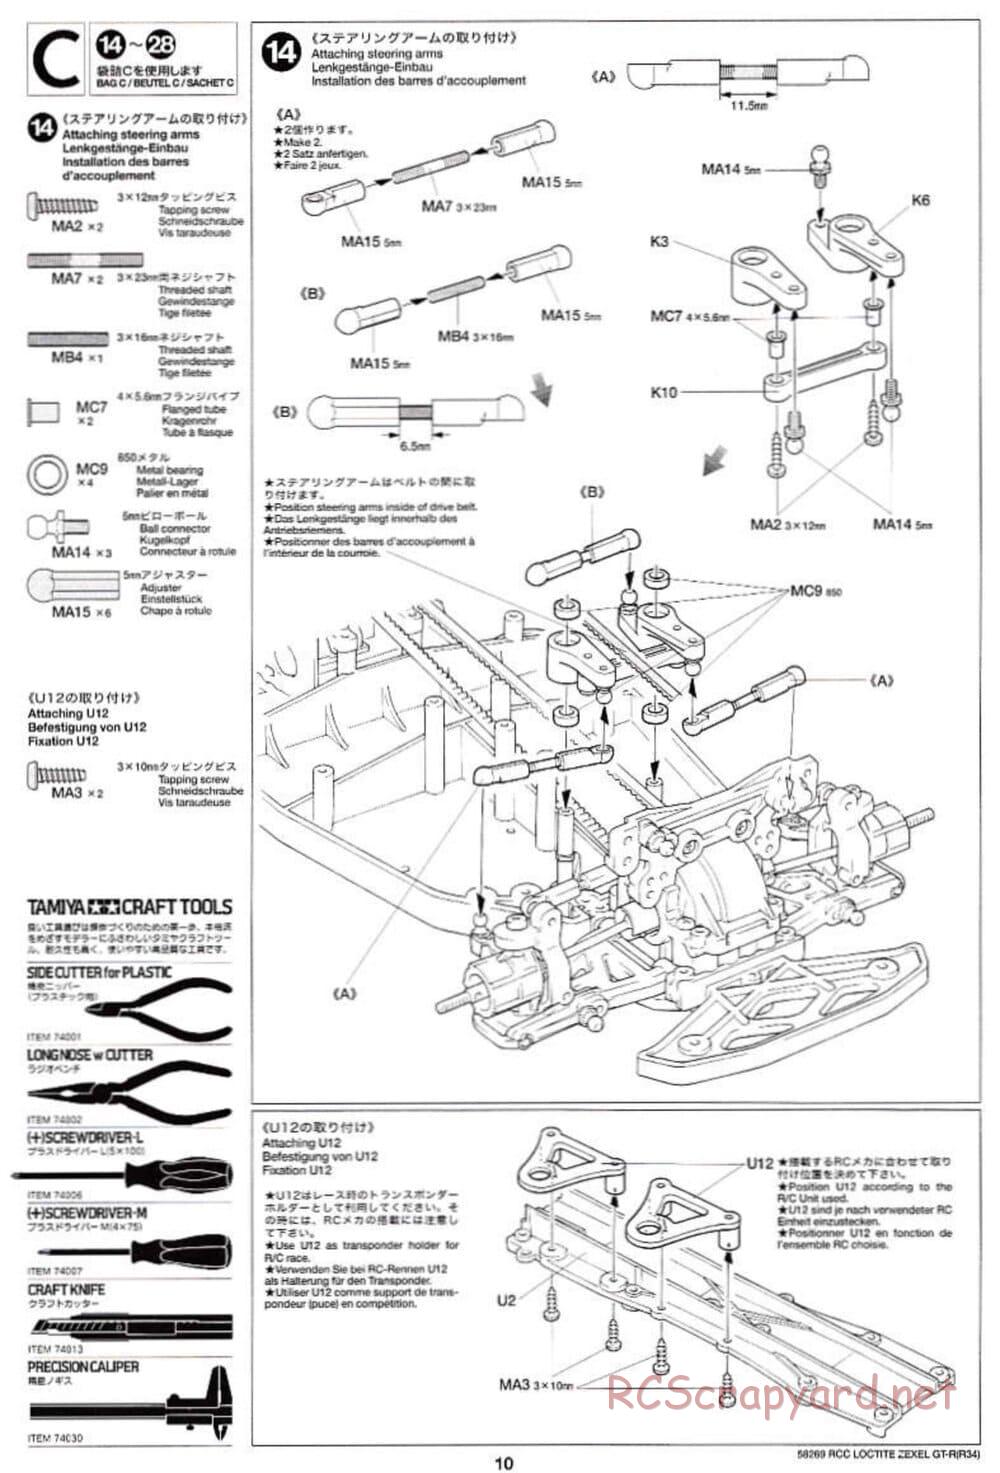 Tamiya - Loctite Zexel Skyline GT-R (R34) - TA-04 Chassis - Manual - Page 10